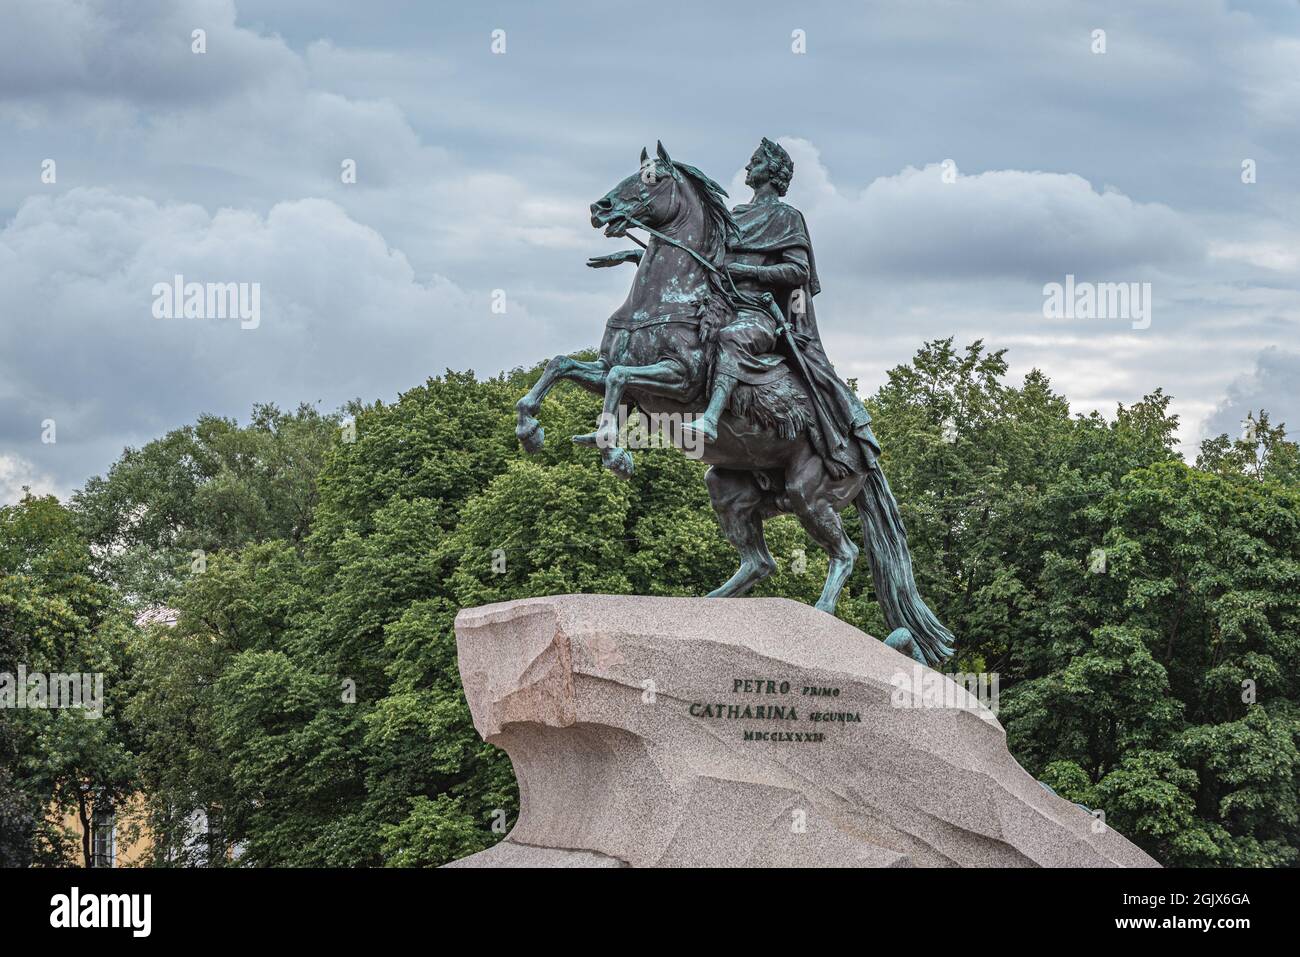 Bronze Horseman (opened in 1782), a statue of Peter the Great in Saint Petersburg, Russia. Stock Photo